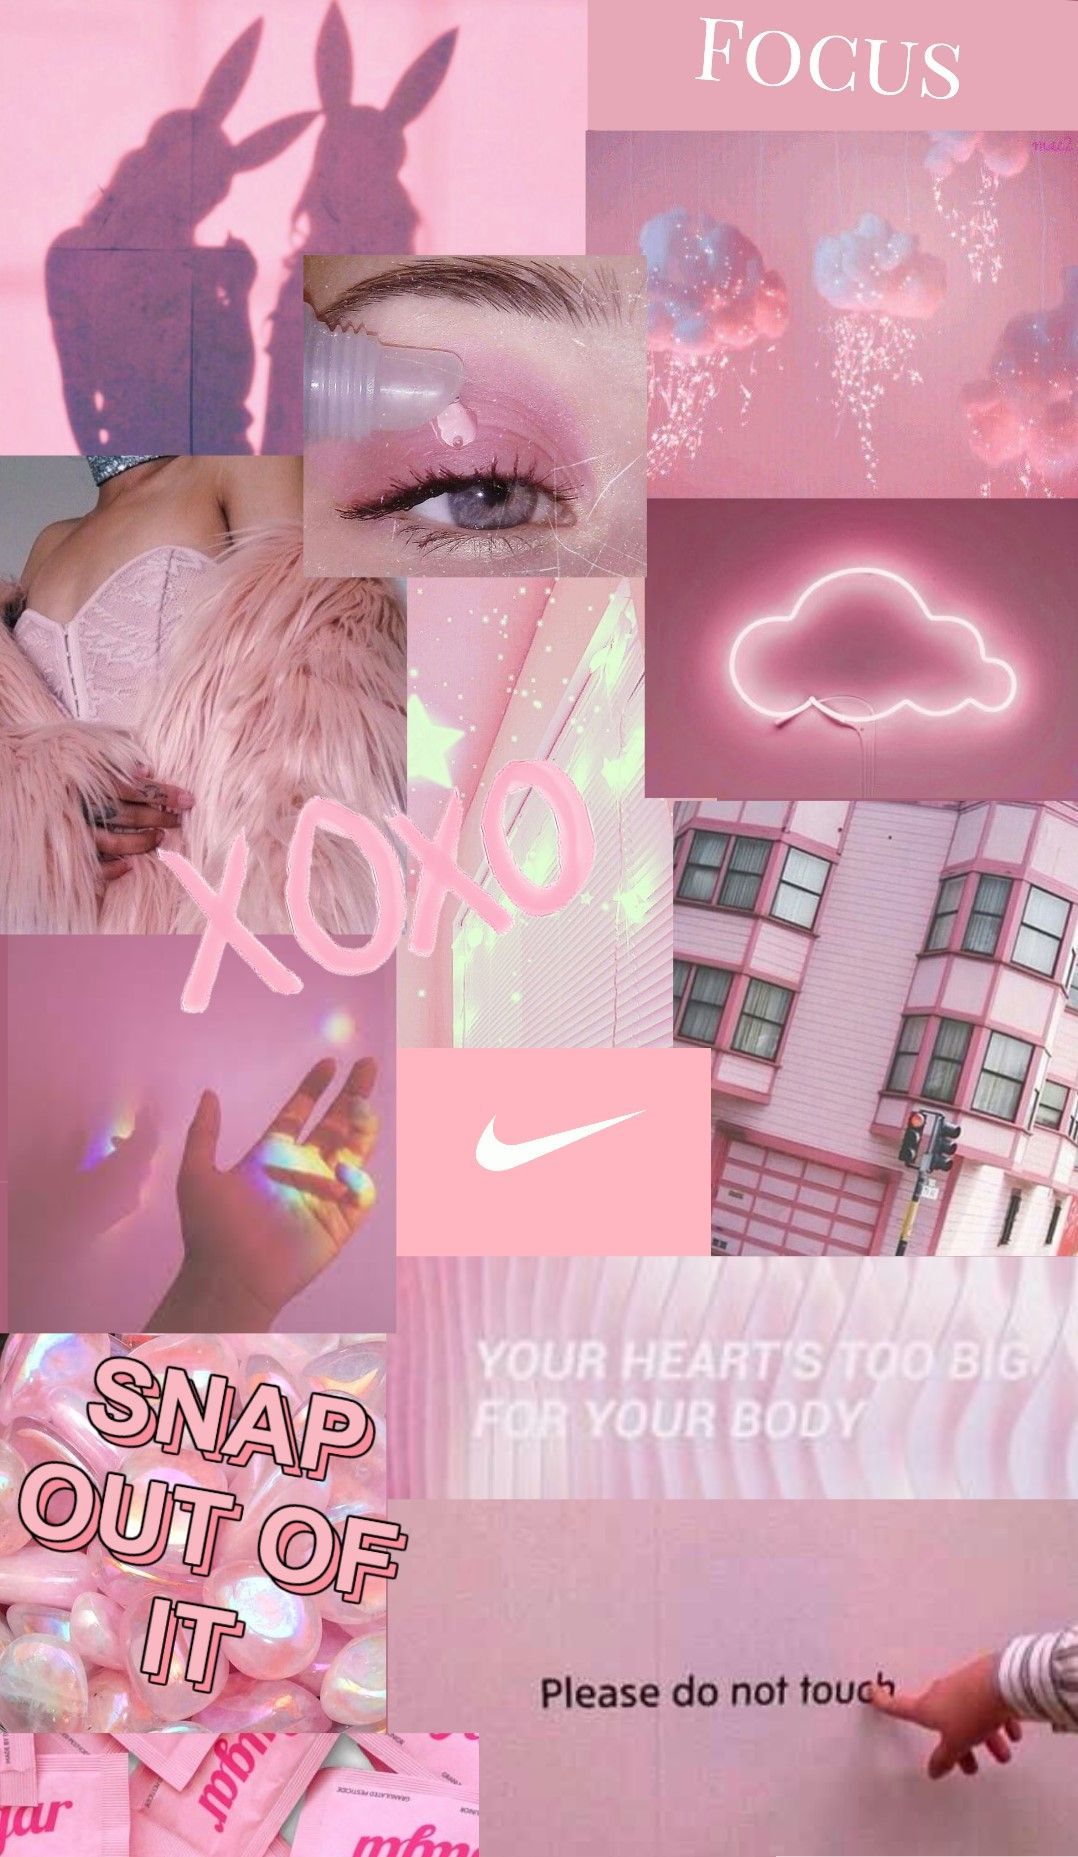 Aesthetic pink background with images of a girl, a neon sign, a building, and a hand - Soft pink